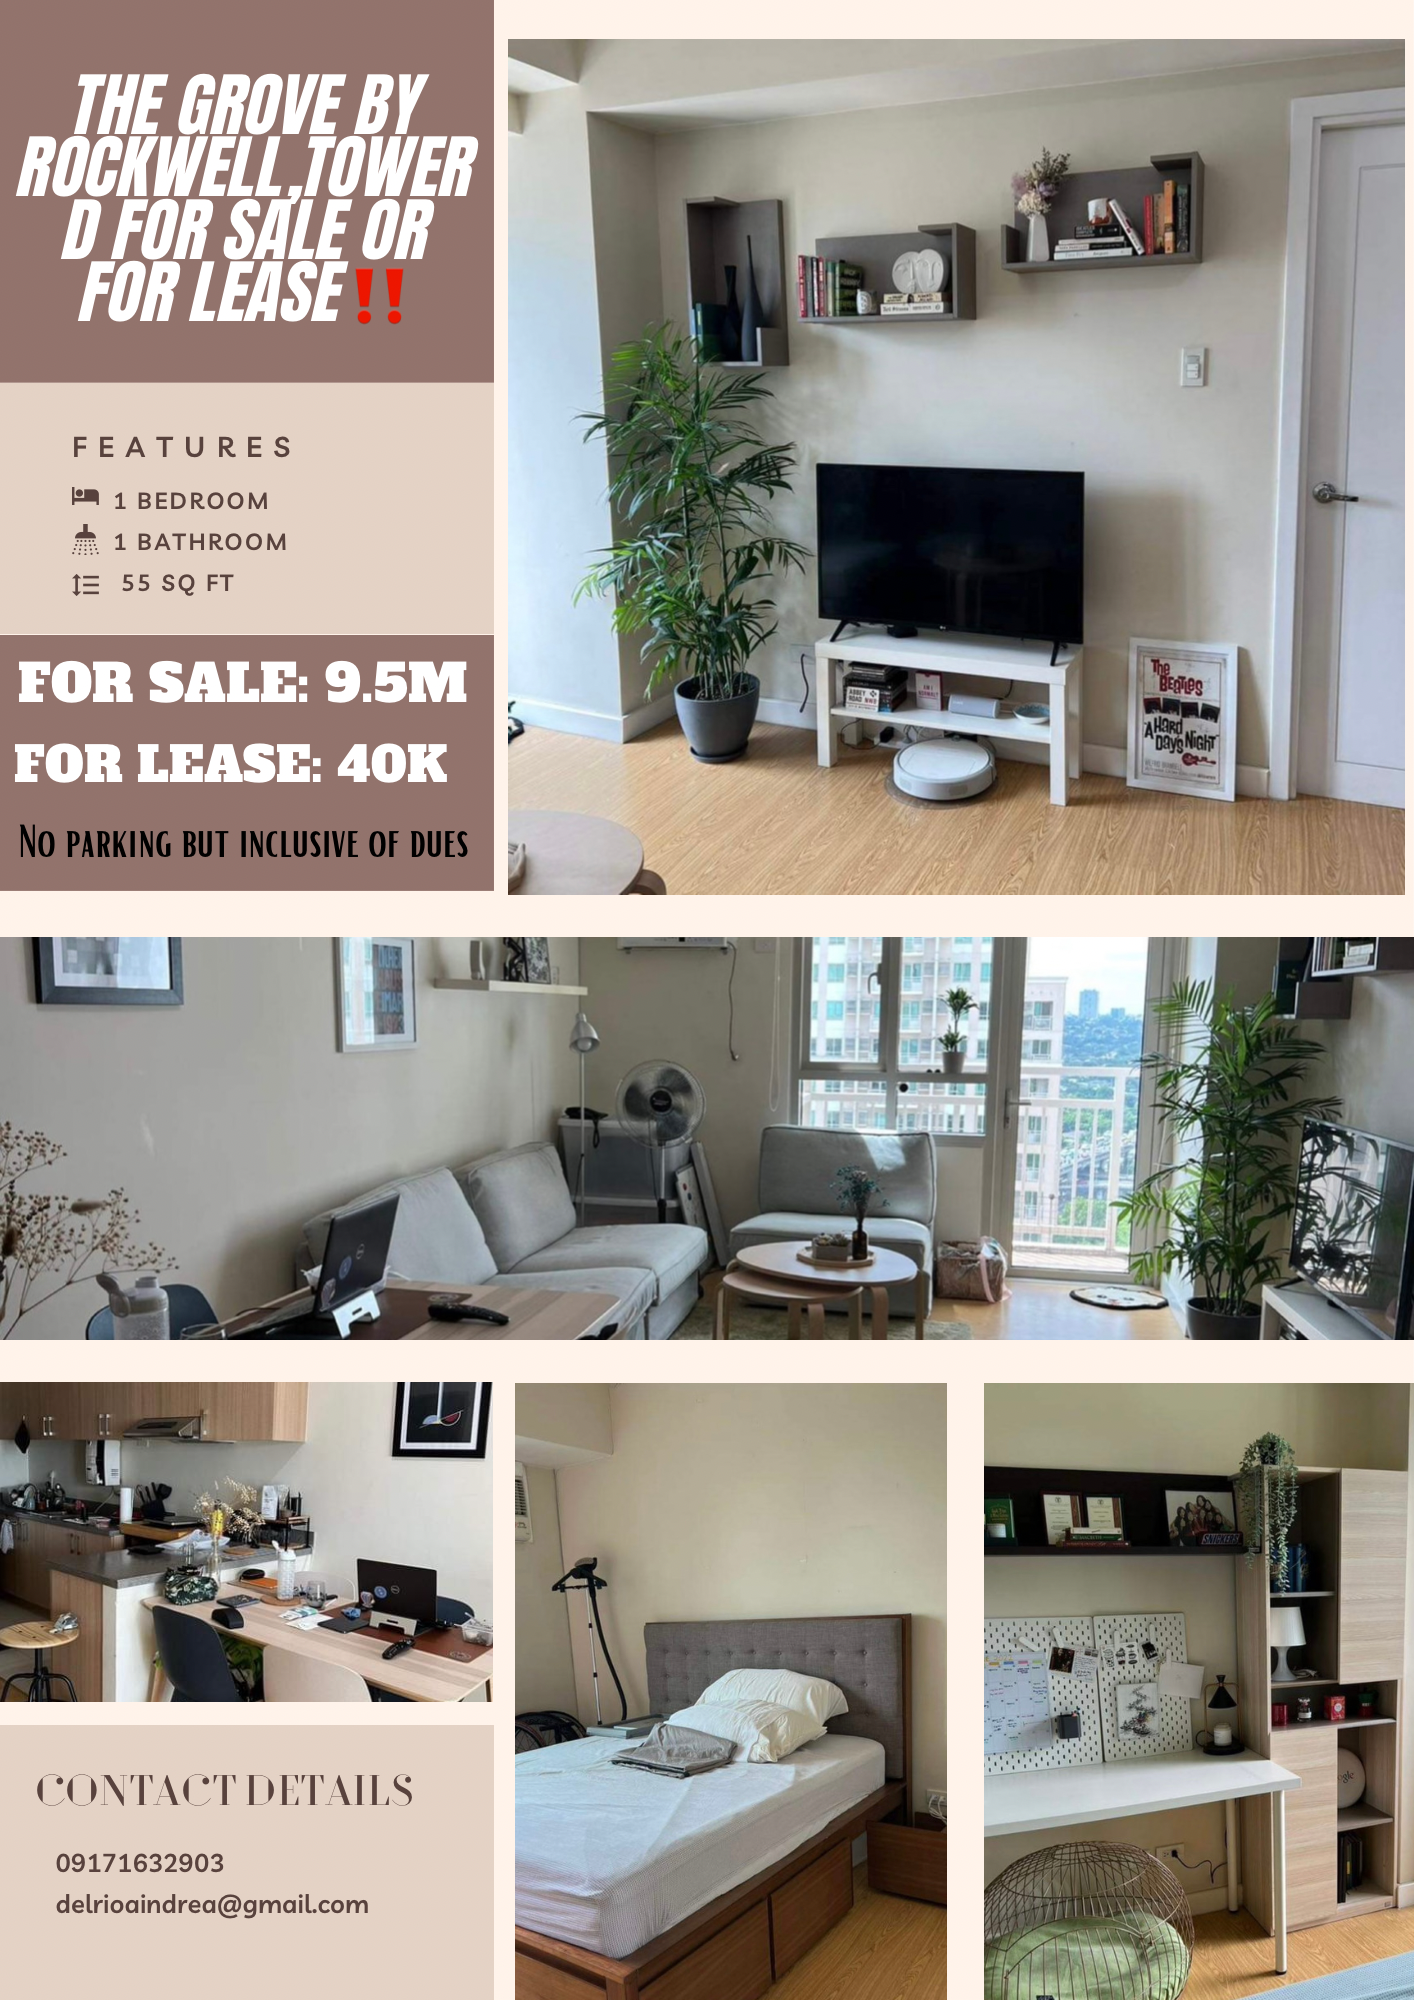 The Grove by Rockwell, Tower D Condominium Unit for Sale or for Lease‼️